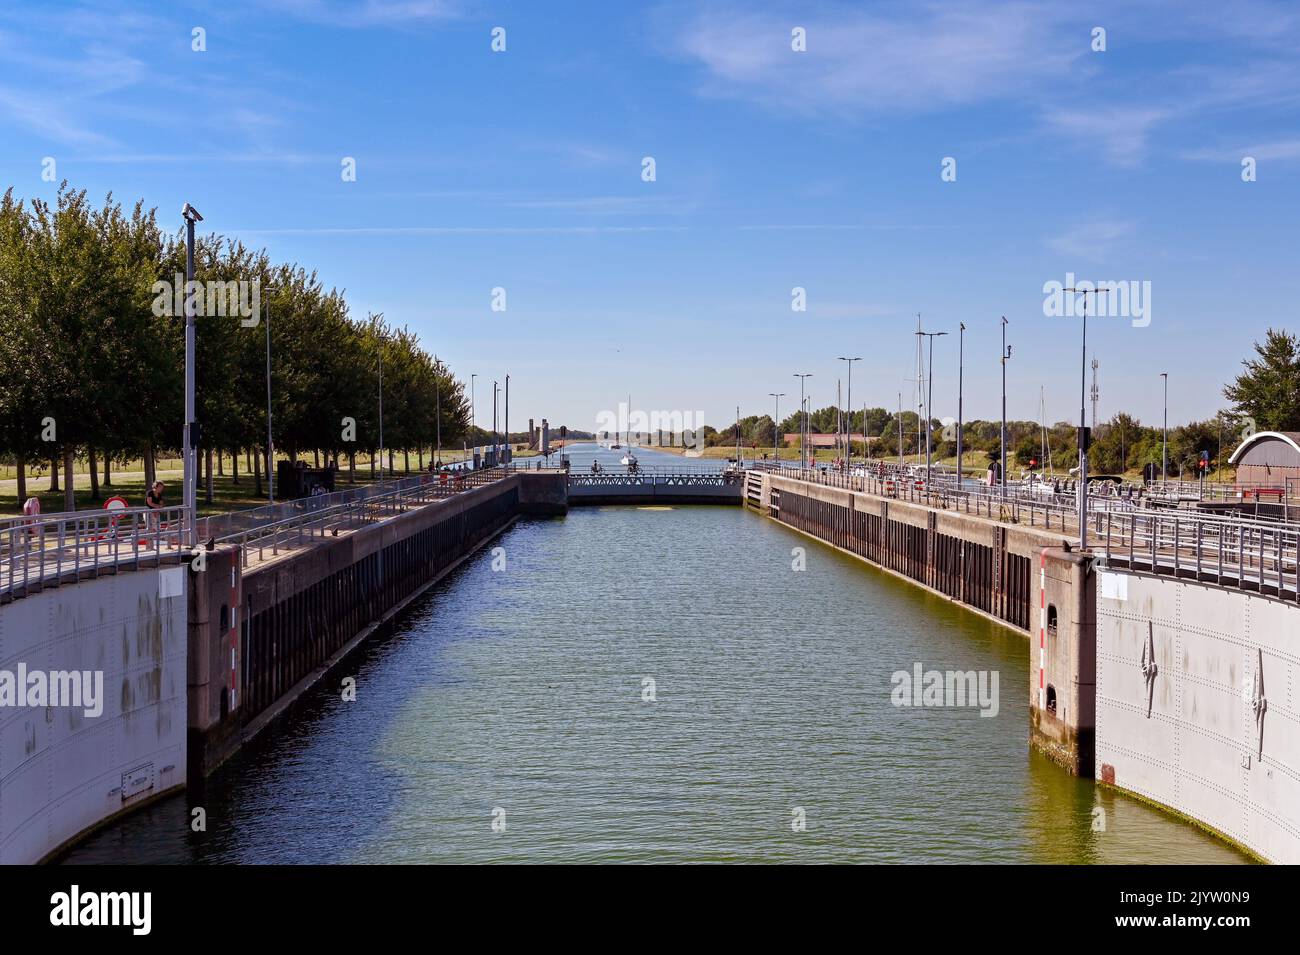 Veere, Netherlands - August 2022: Entrance to the canal lock near the town with lock gates open Stock Photo